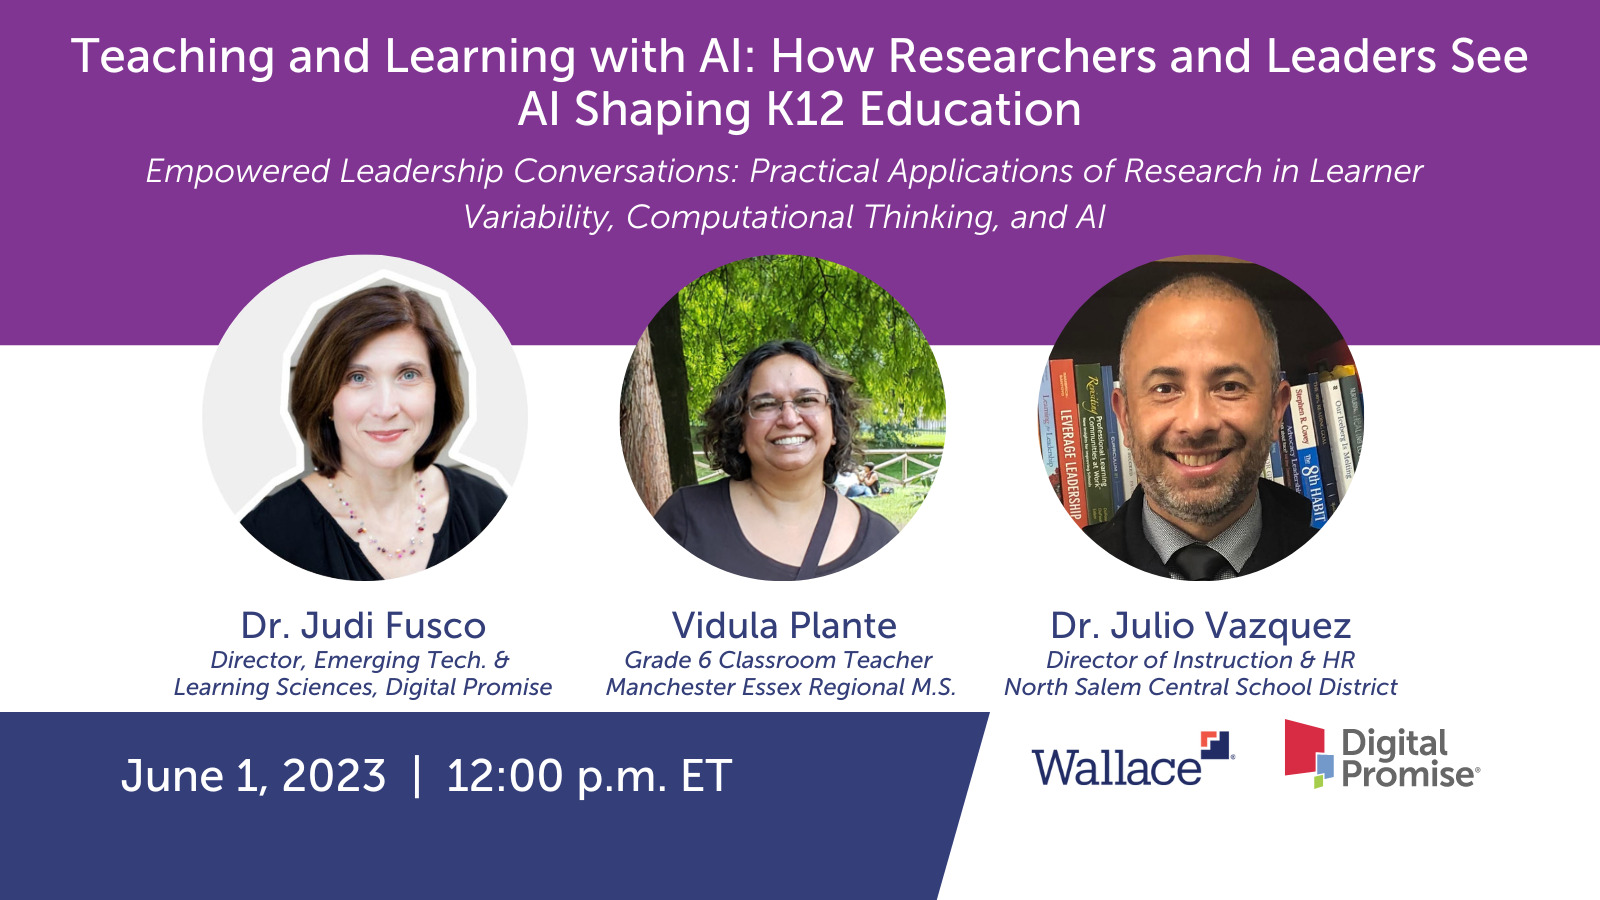 Teaching and Learning with I: How Researchers and Leaders See AI Shaping K-12 Education; featuring Dr. Judi Fusco, Vidula Plante, Dr. Julio Vazquez